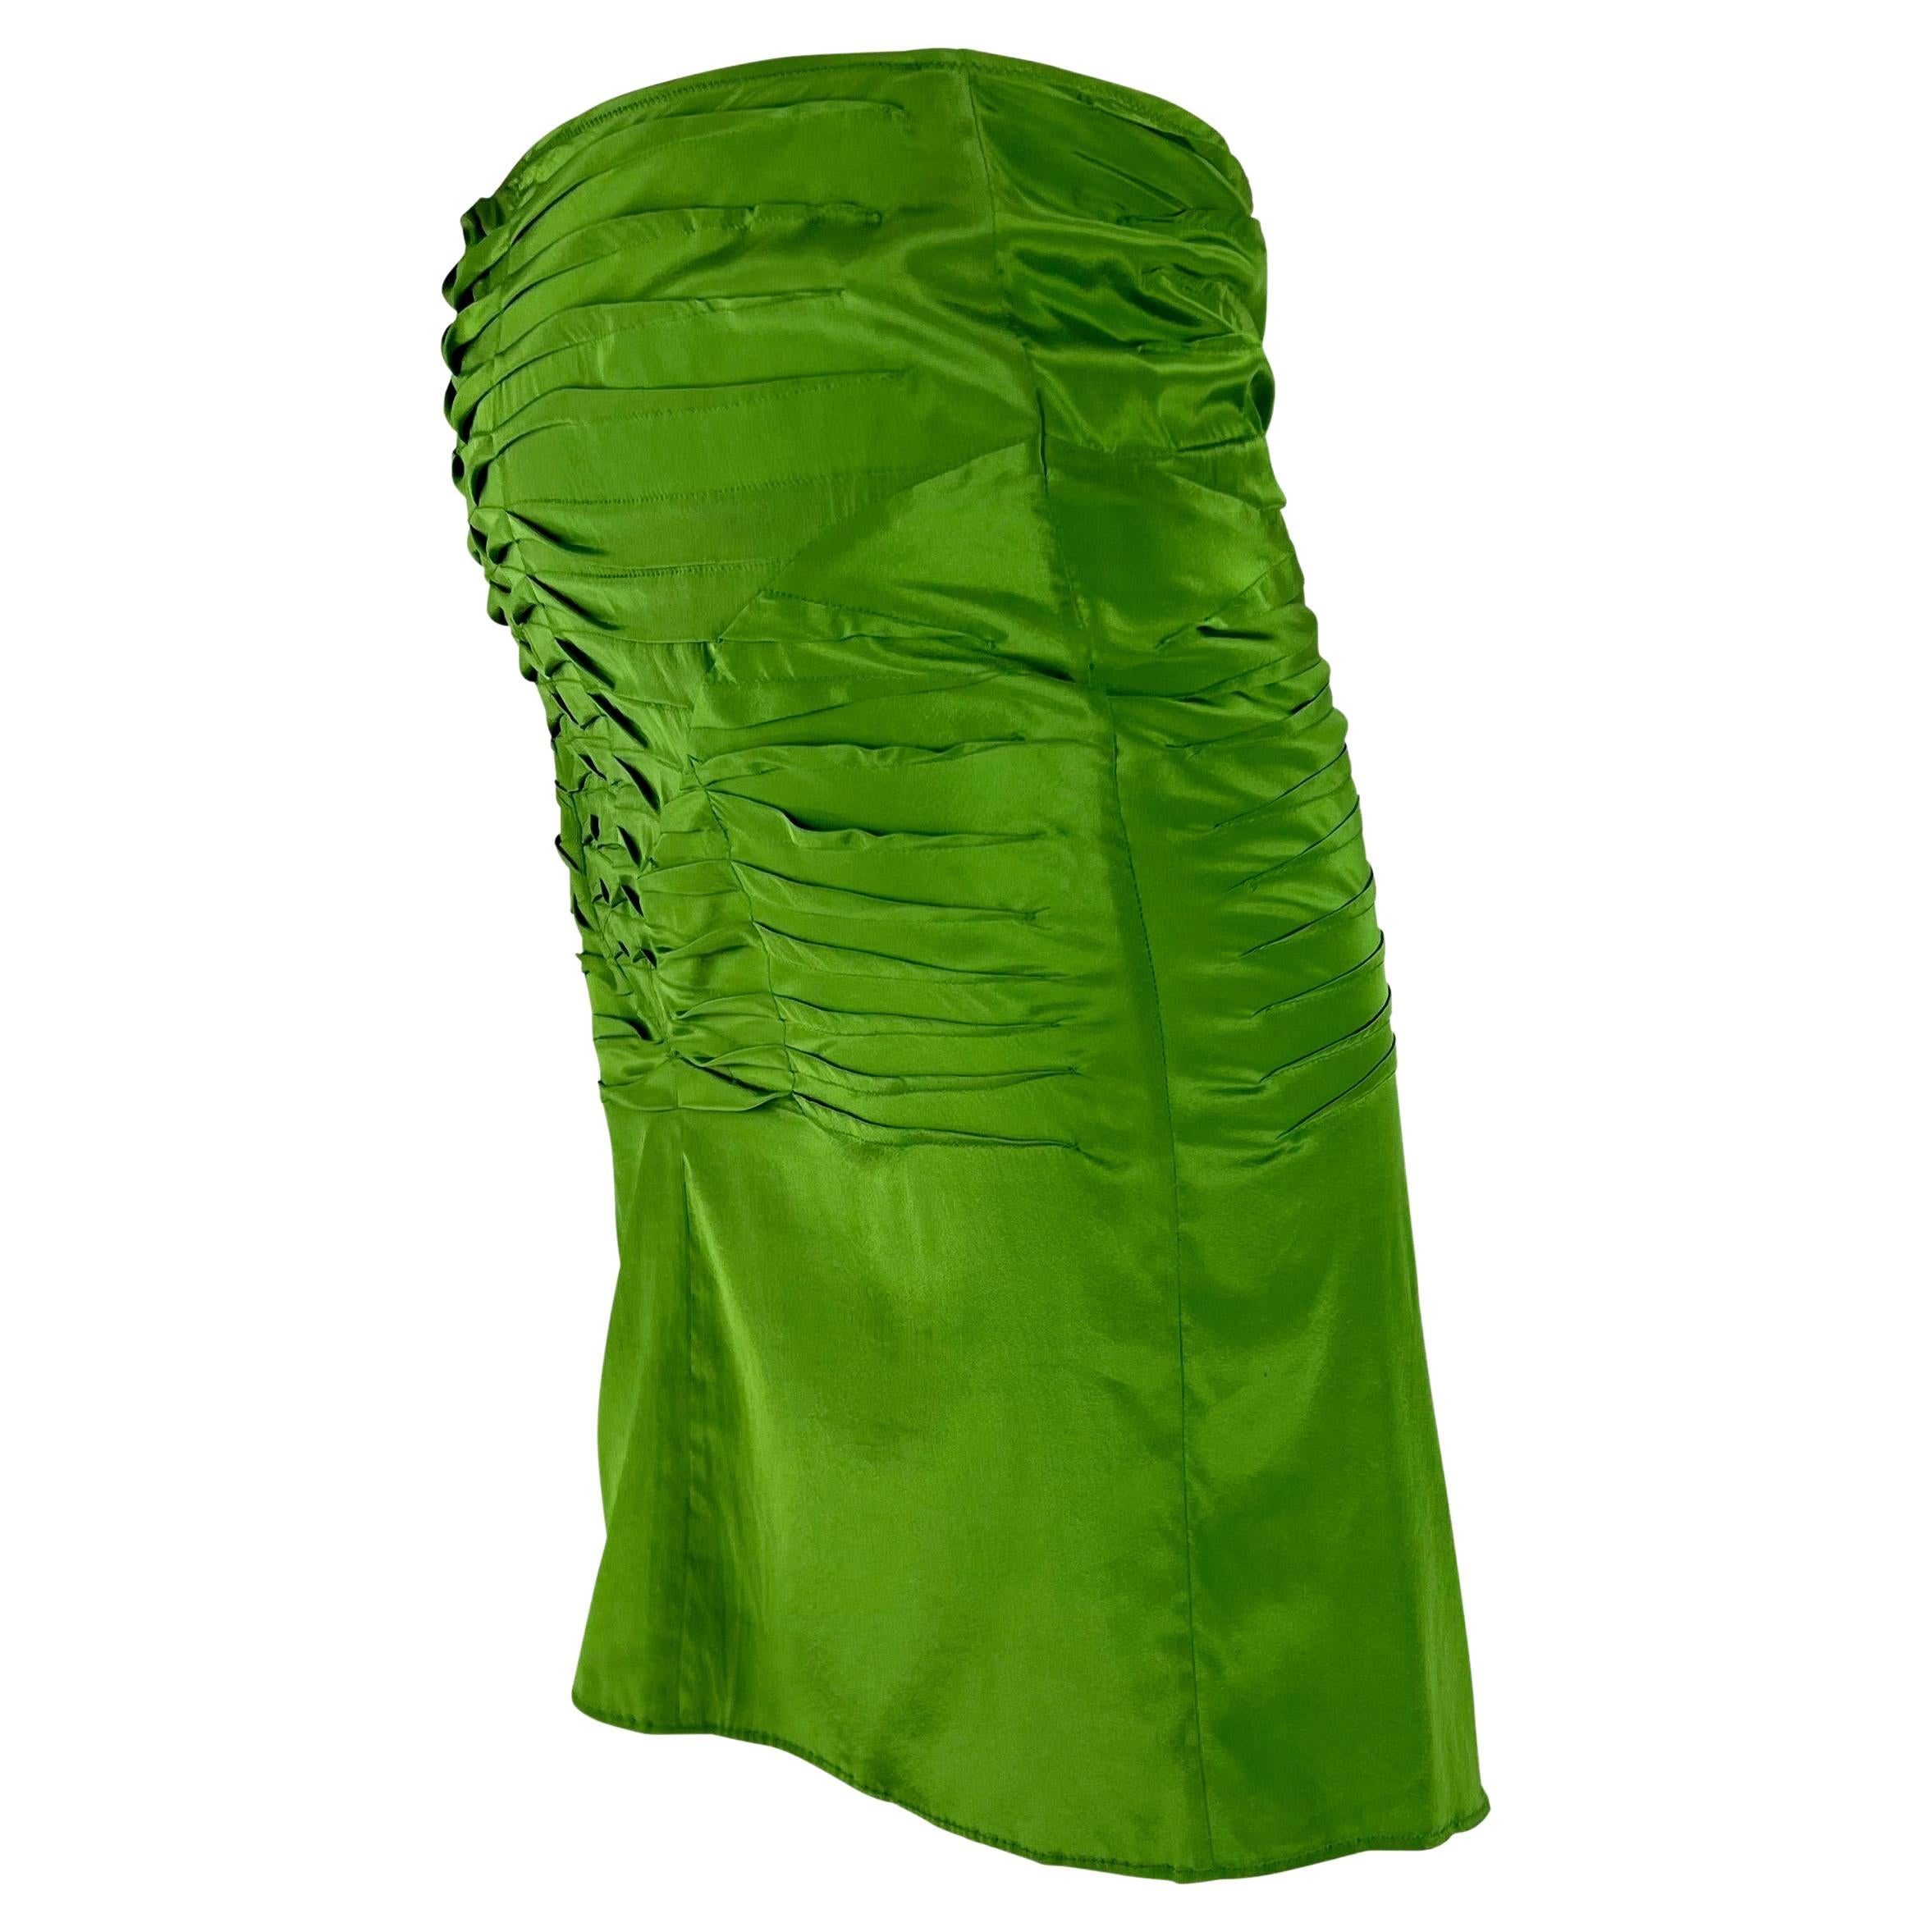 S/S 2003 Gucci by Tom Ford Green Stretch Silk Ruched Skirt For Sale 1